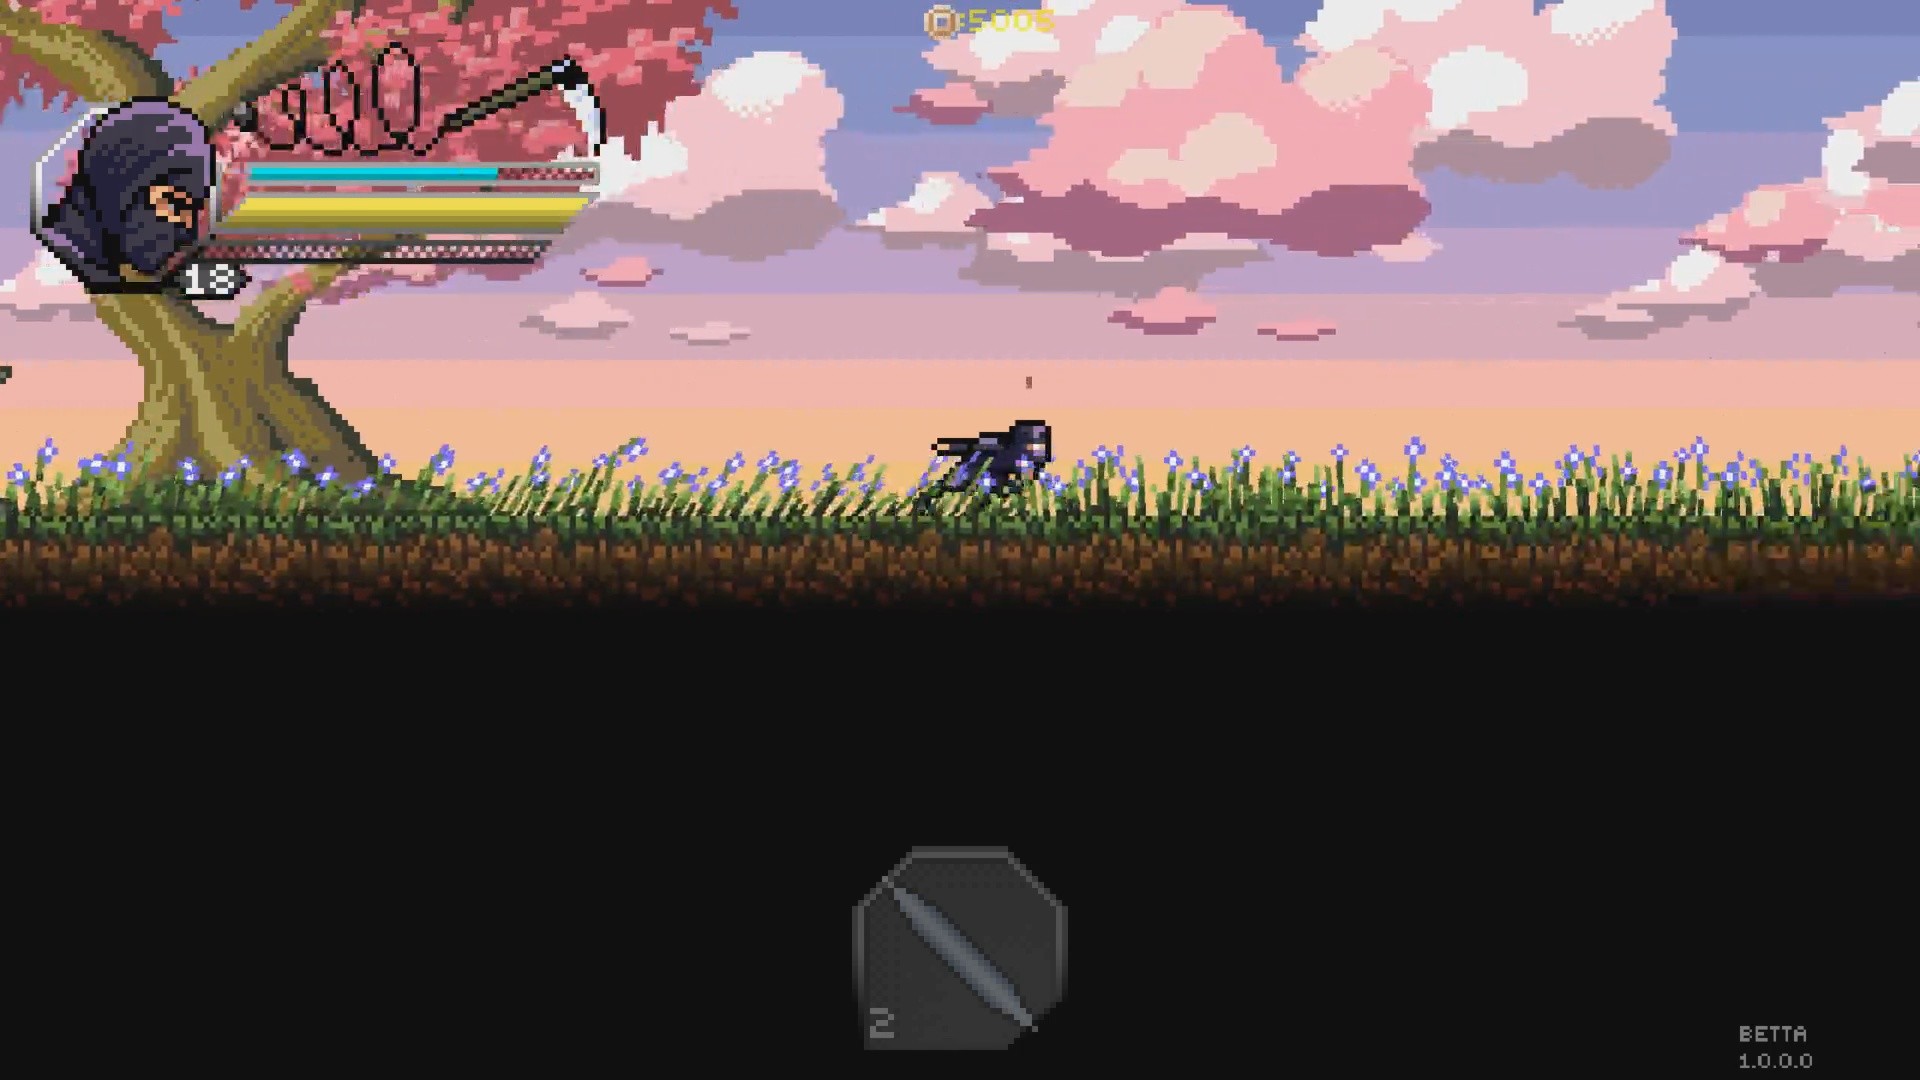 Within the blade screenshot